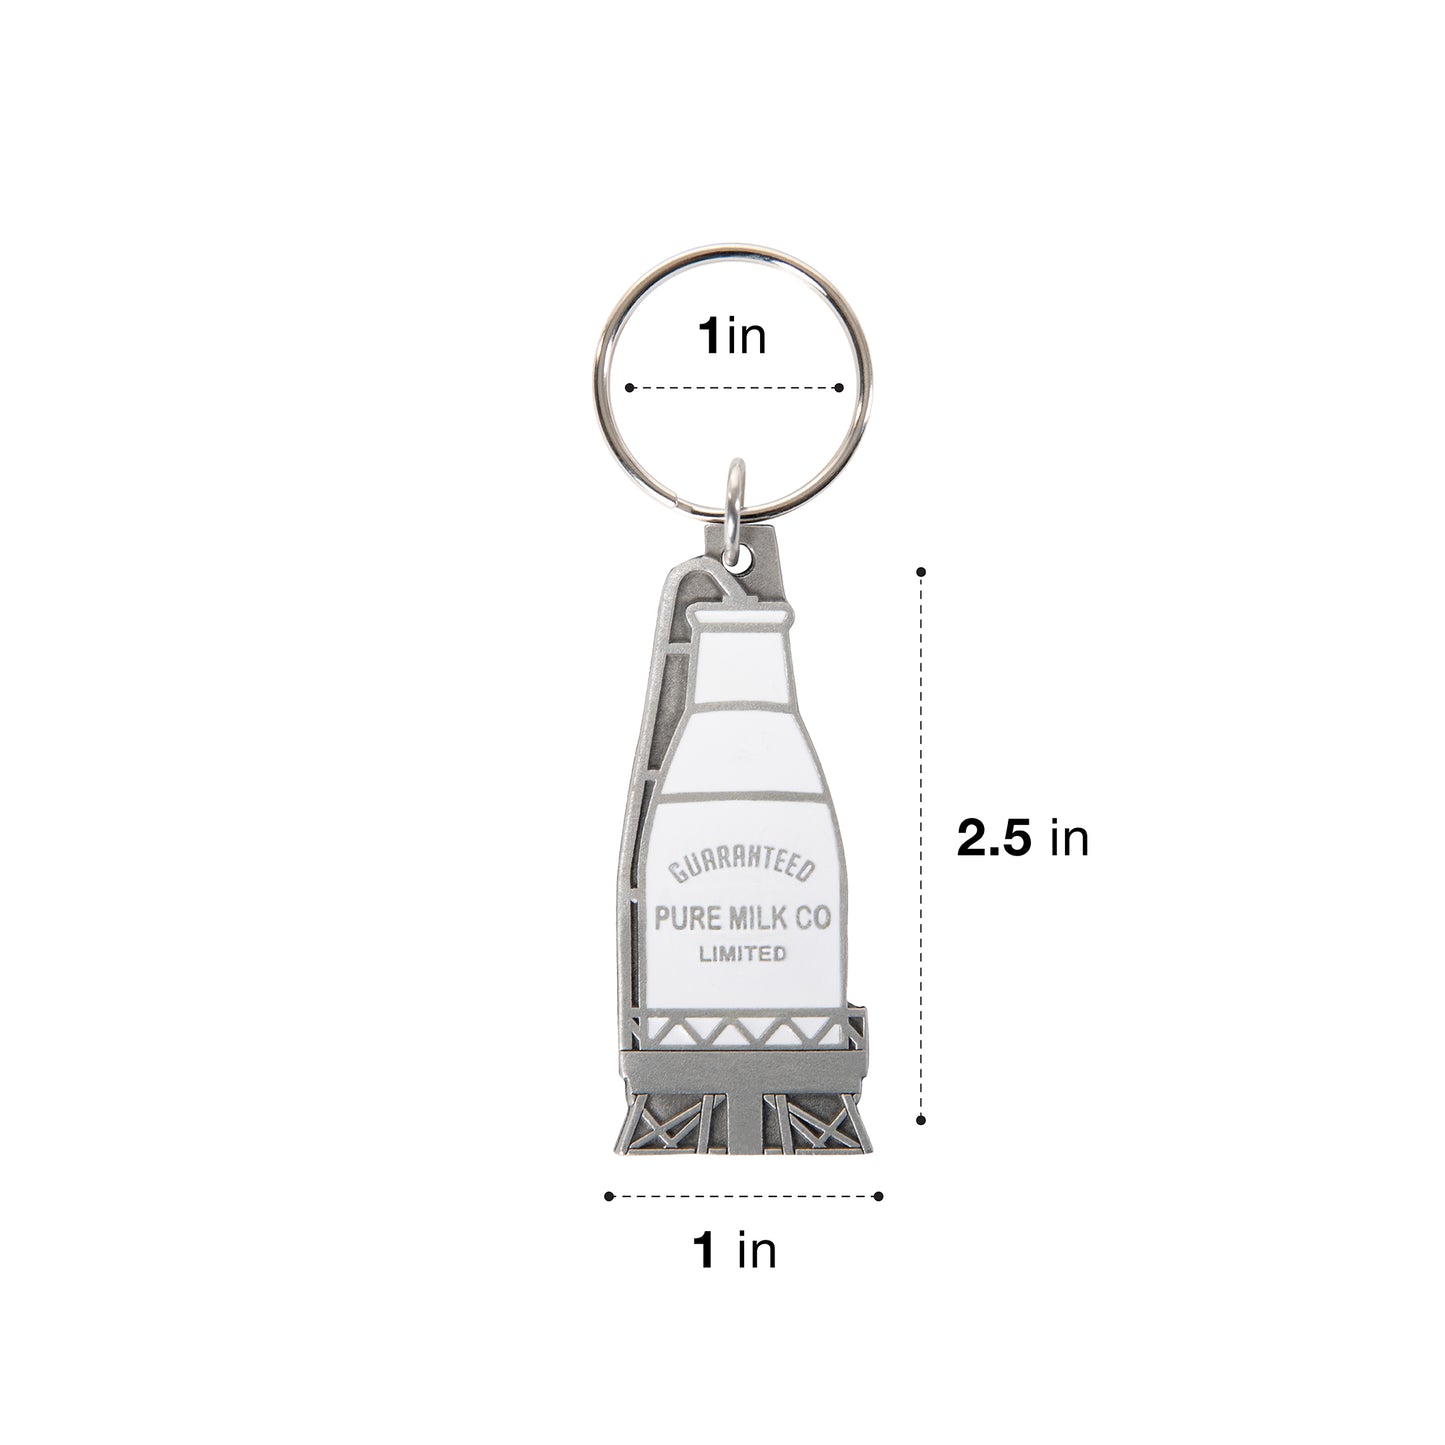 Guaranteed Pure Milk Co Pewter Keychain